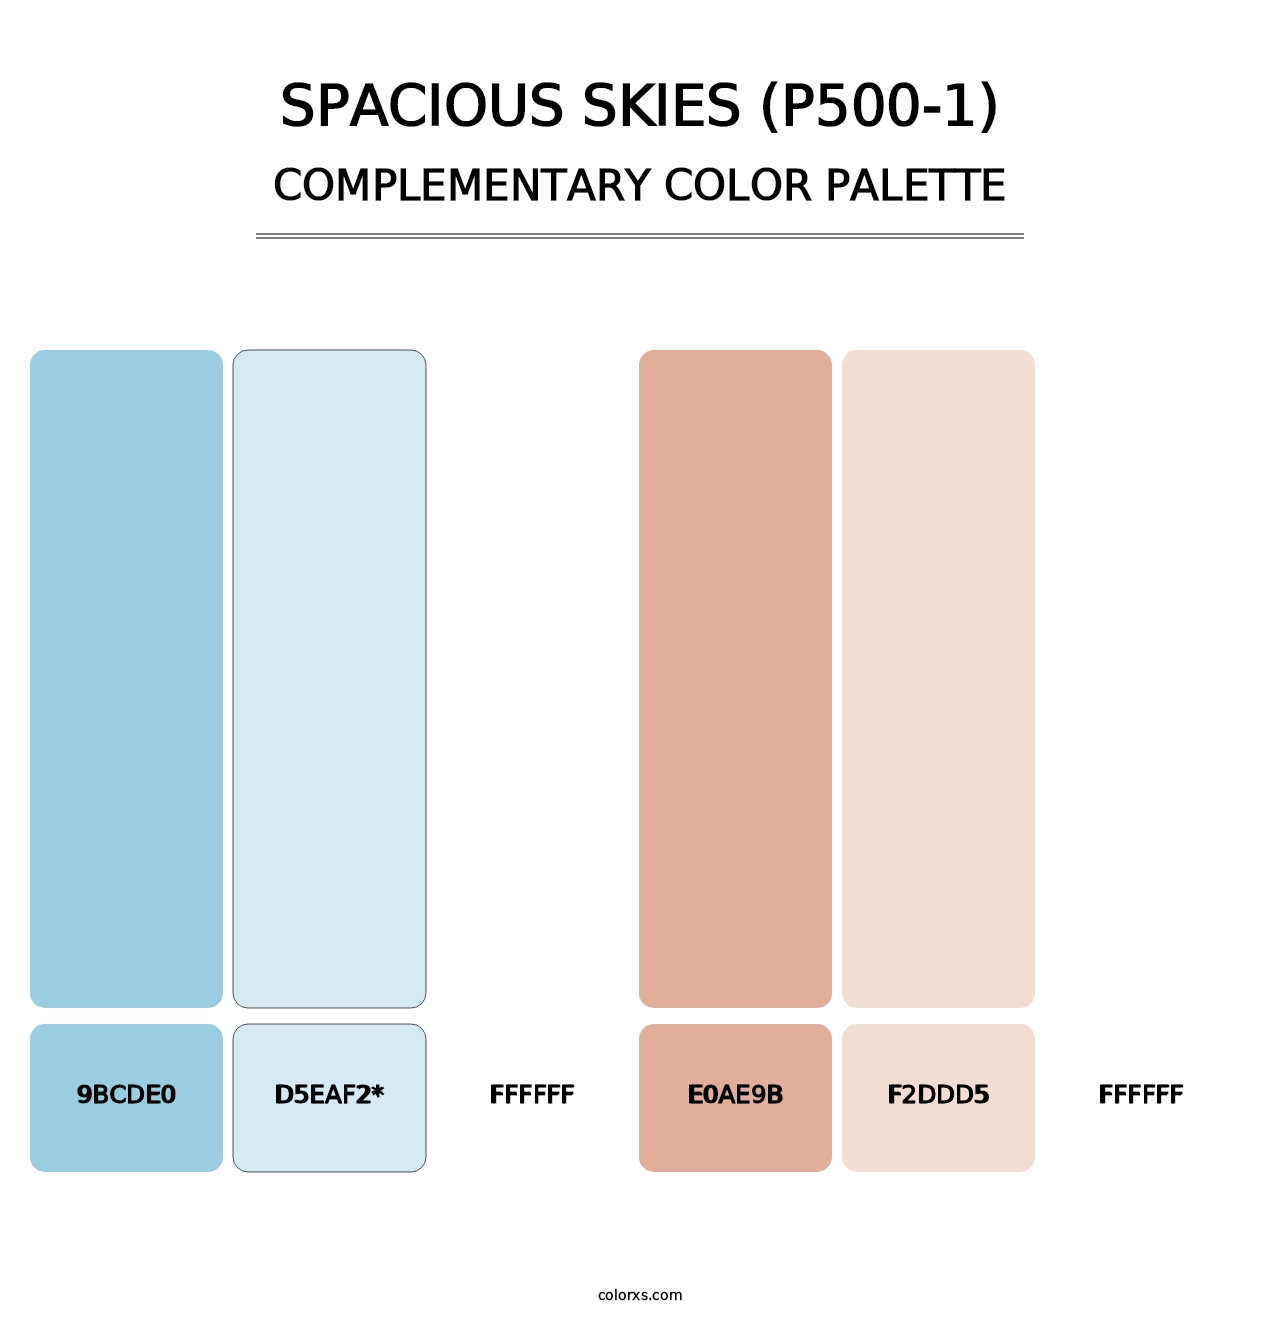 Spacious Skies (P500-1) - Complementary Color Palette